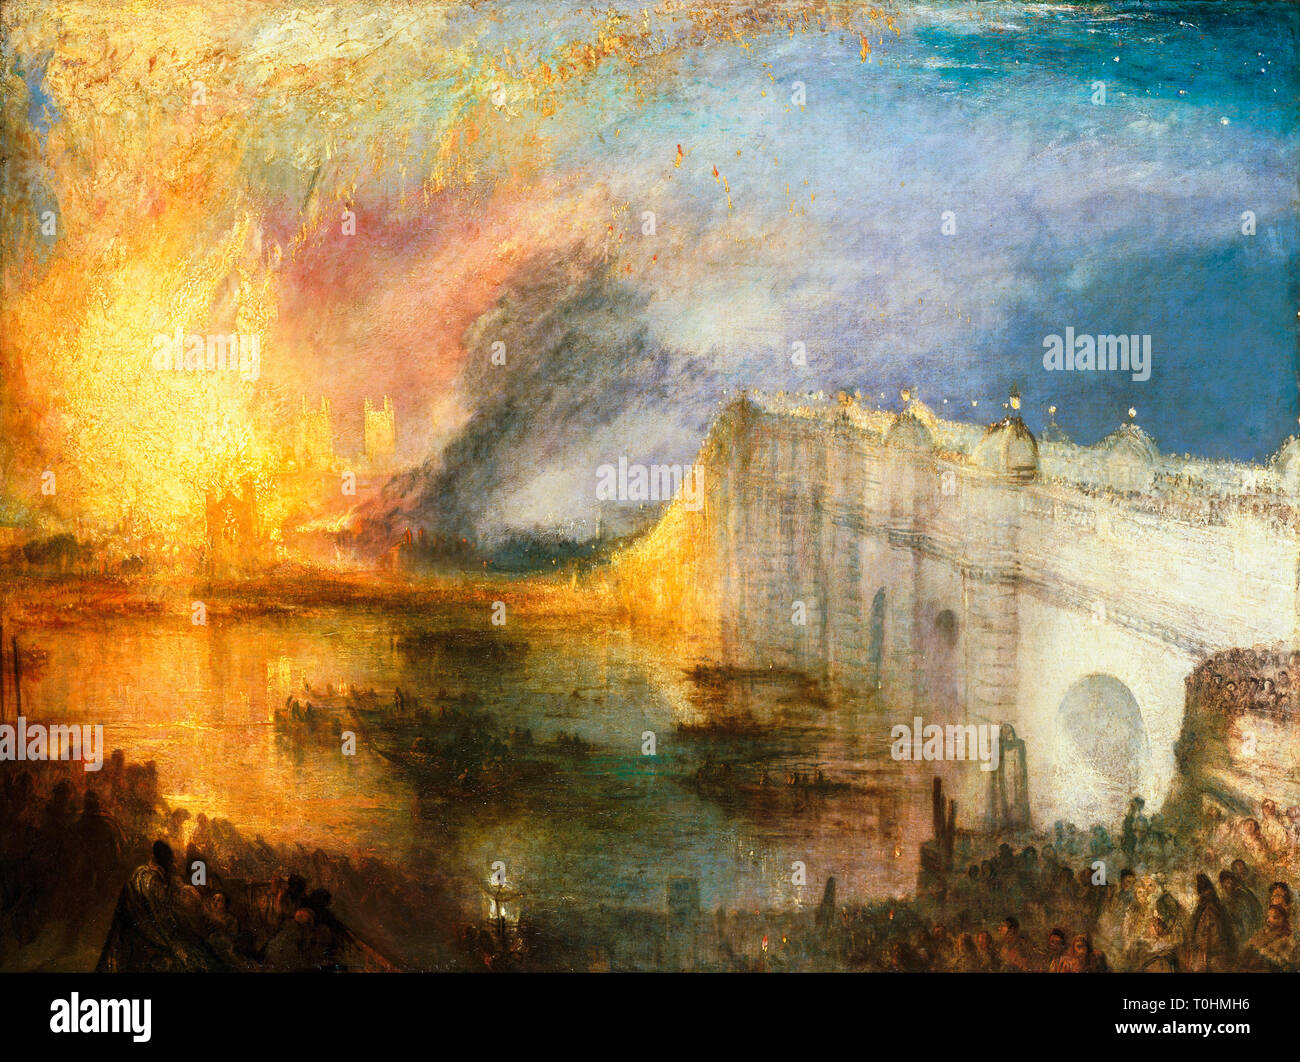 JMW Turner, The Burning of the Houses of Lords and Commons, painting, c. 1834 Stock Photo